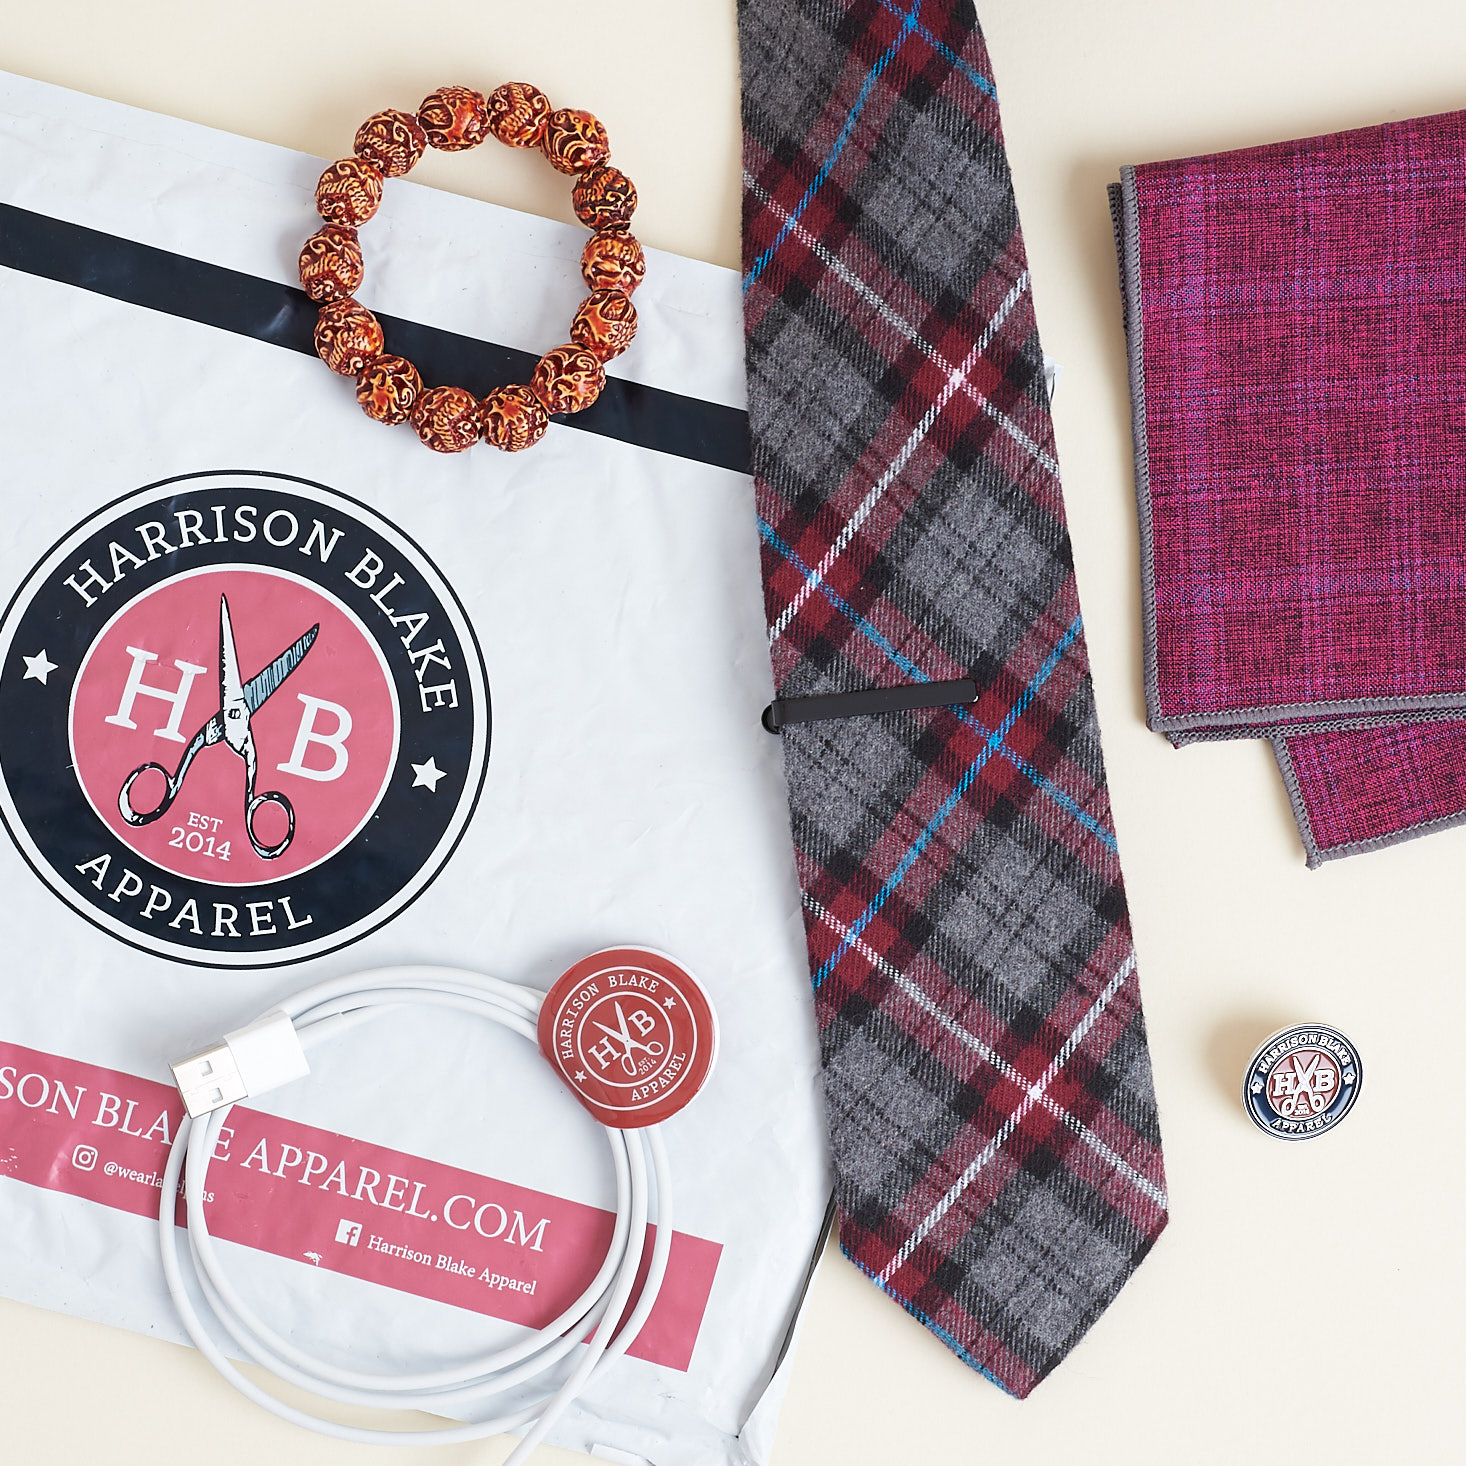 Harrison Blake Apparel Monthly Club Review + Coupon – September 2017